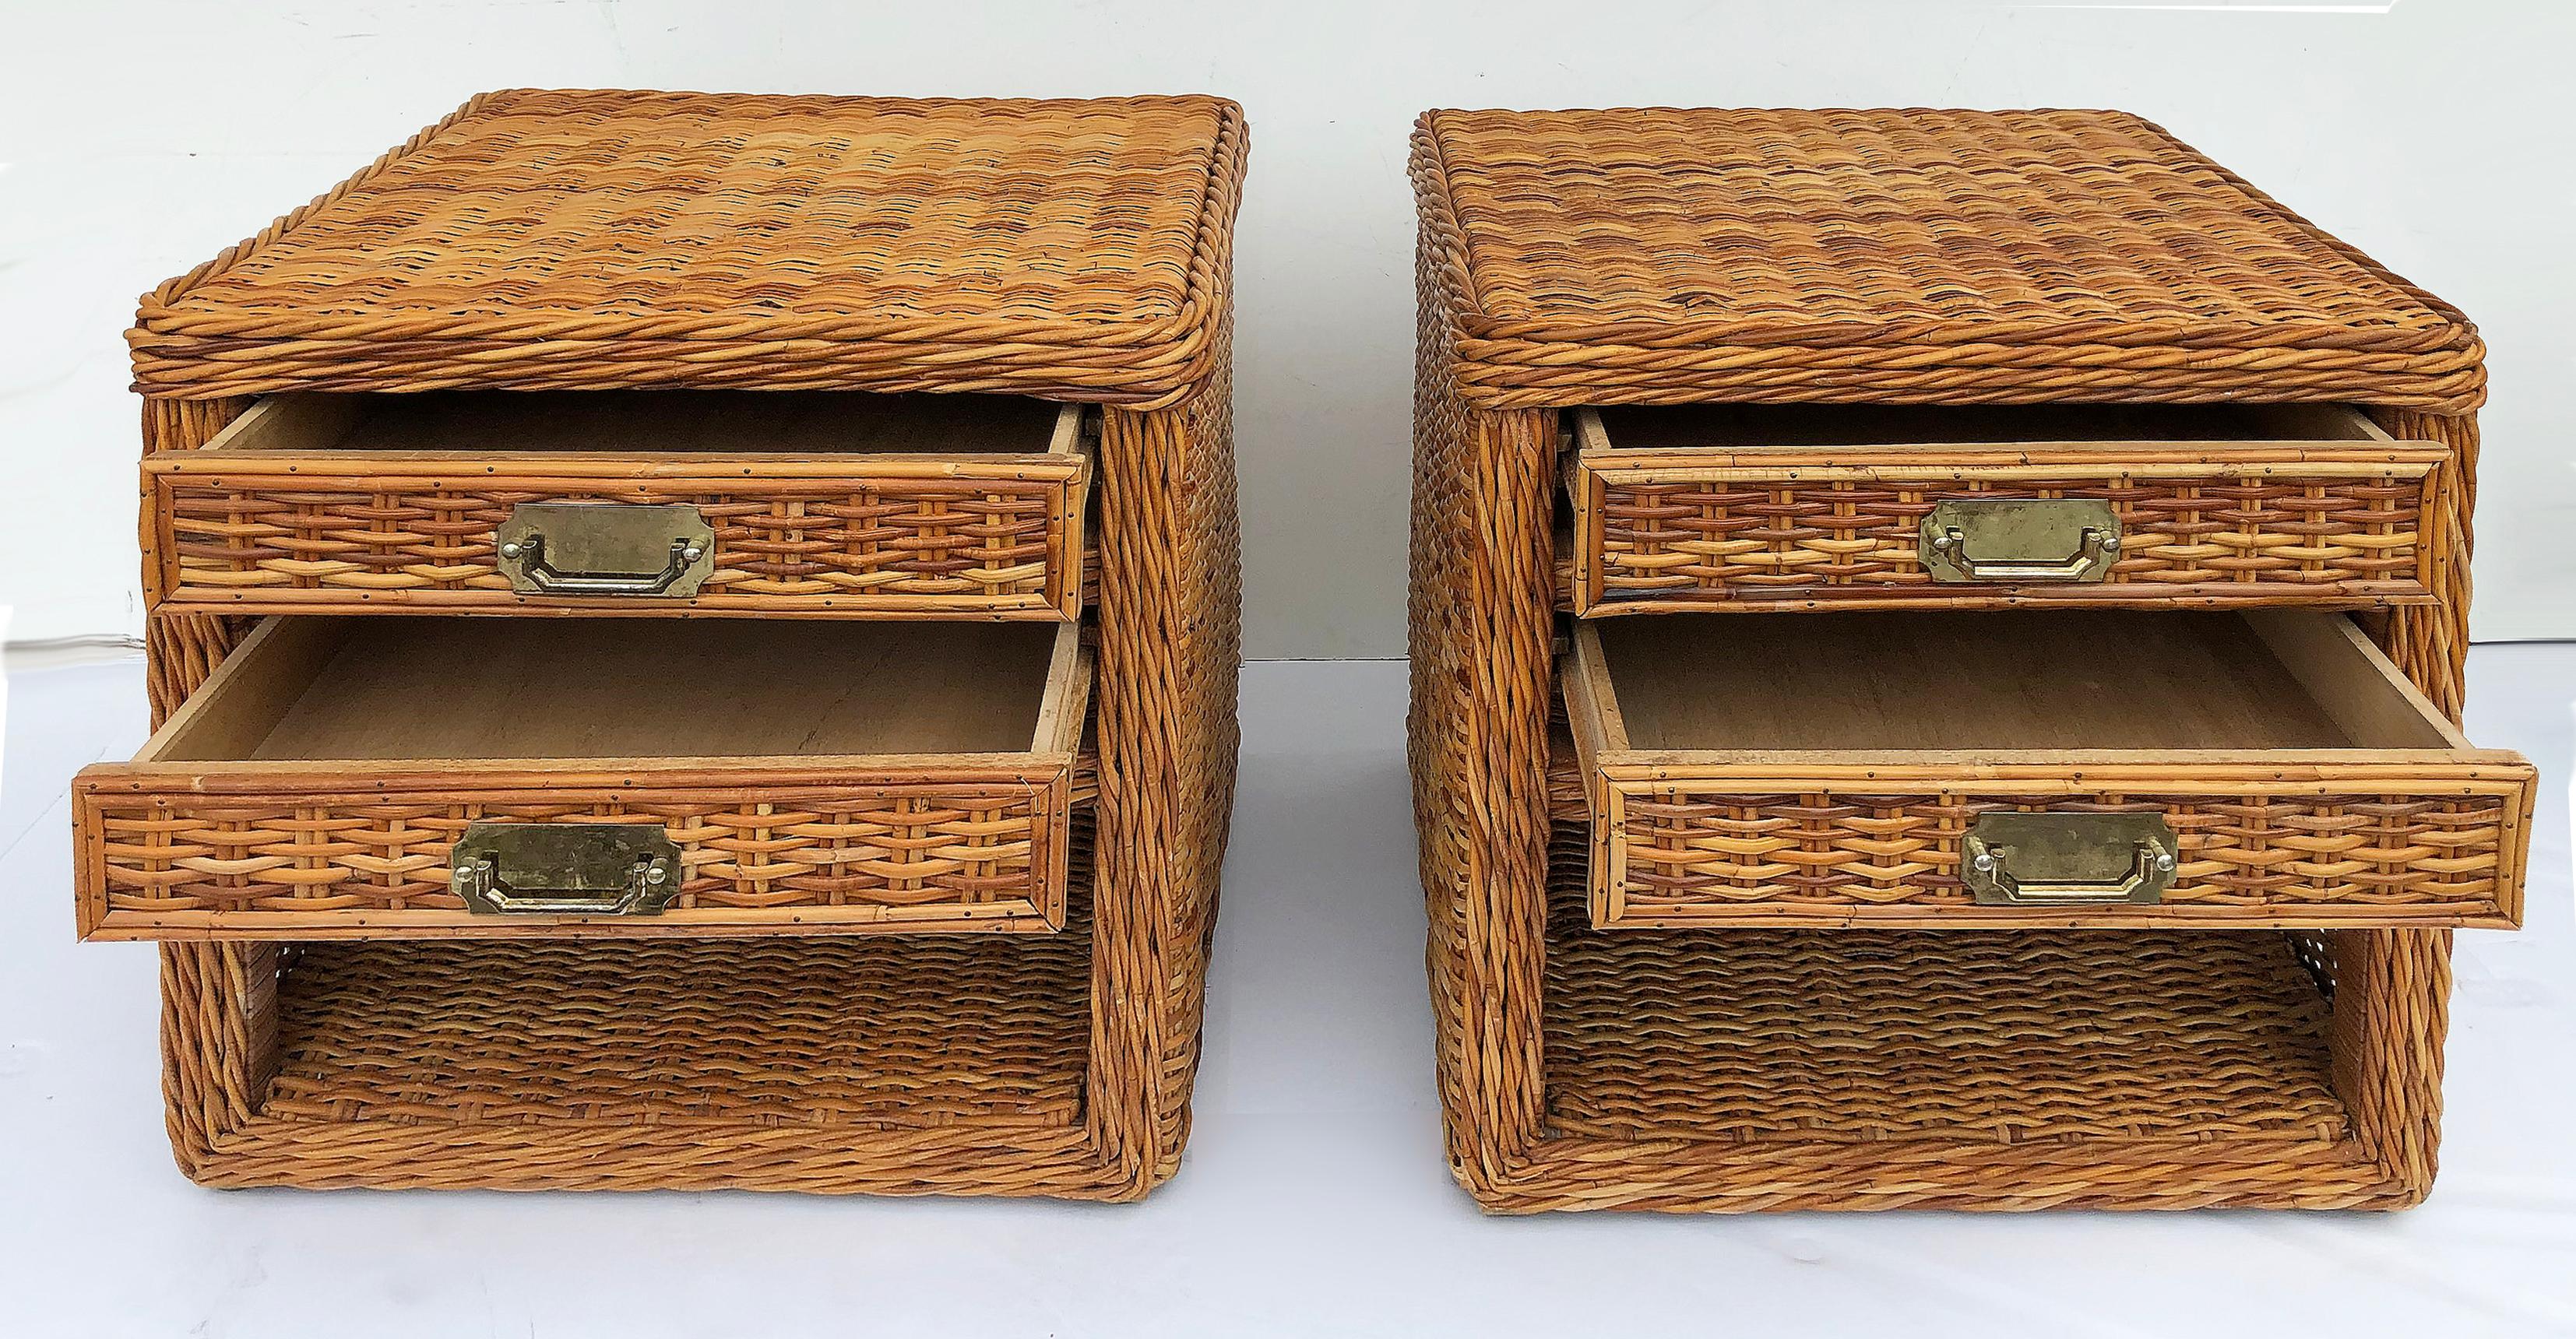 North American Vintage Bielecky Brothers Woven Rattan Night Stands, Pair